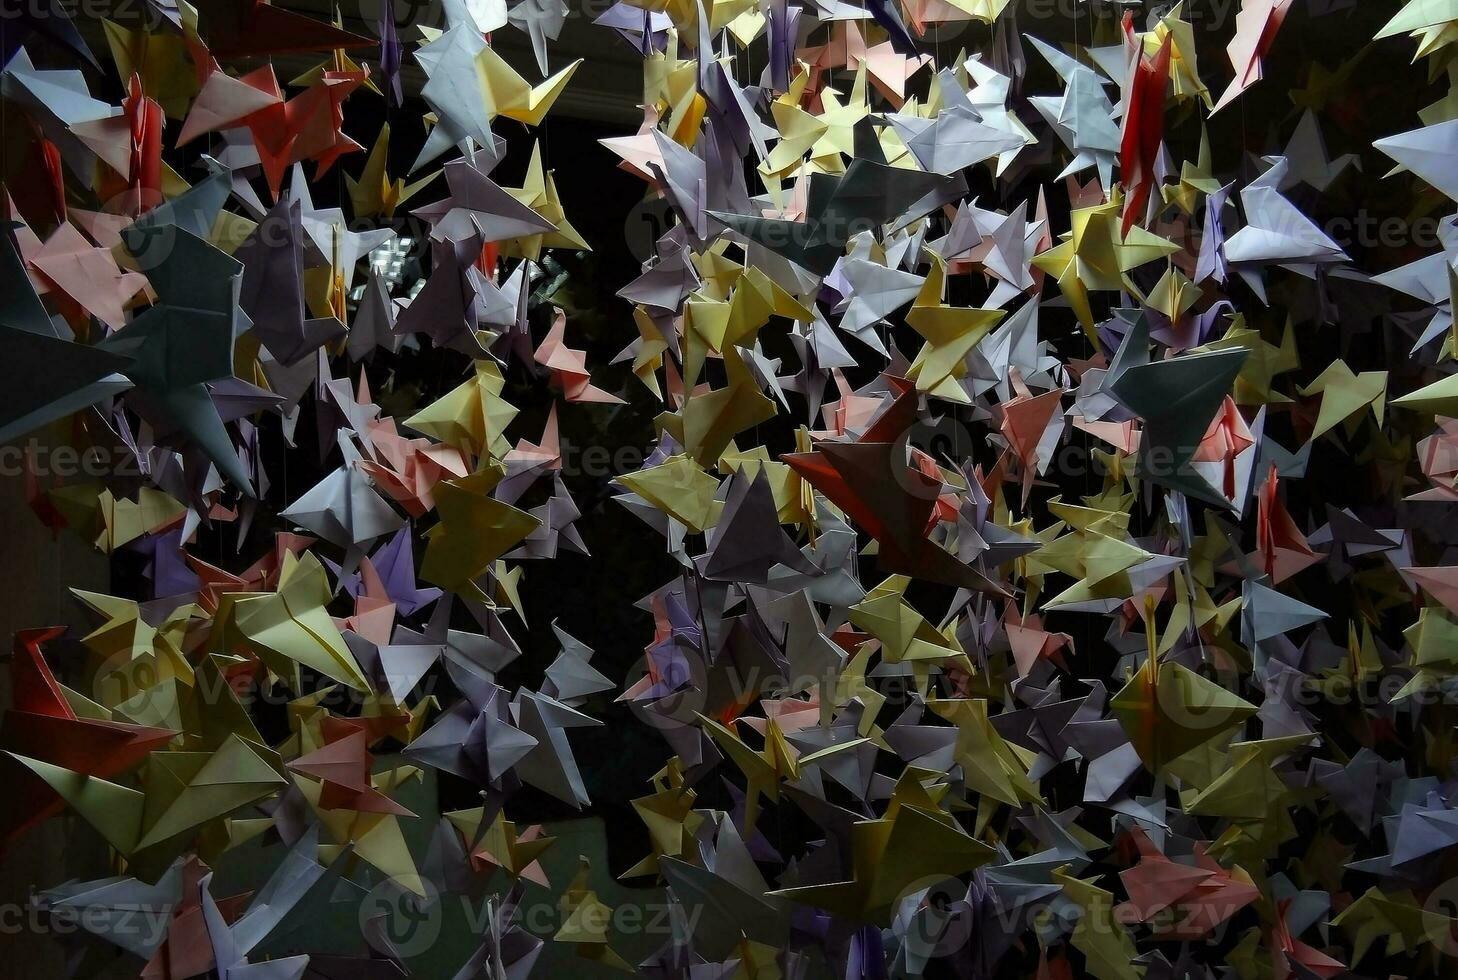 More Than 1000 Origami Cranes Honoring Lives Lost to COVID-19 photo